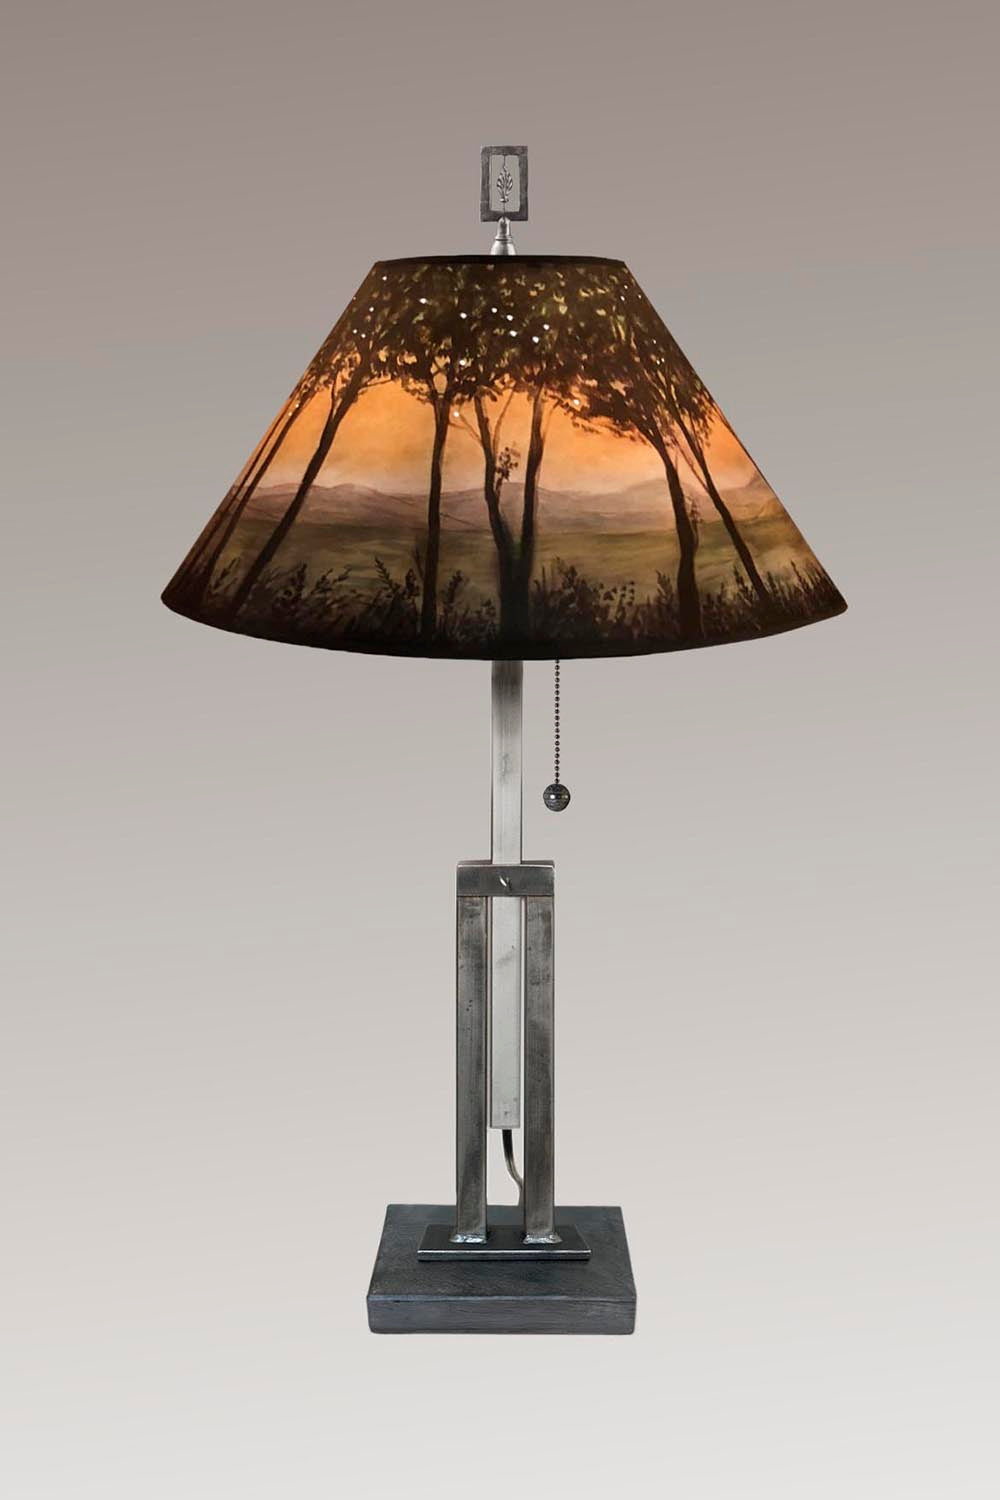 Janna Ugone &amp; Co Table Lamps Adjustable-Height Steel Table Lamp with Large Conical Shade in Dawn